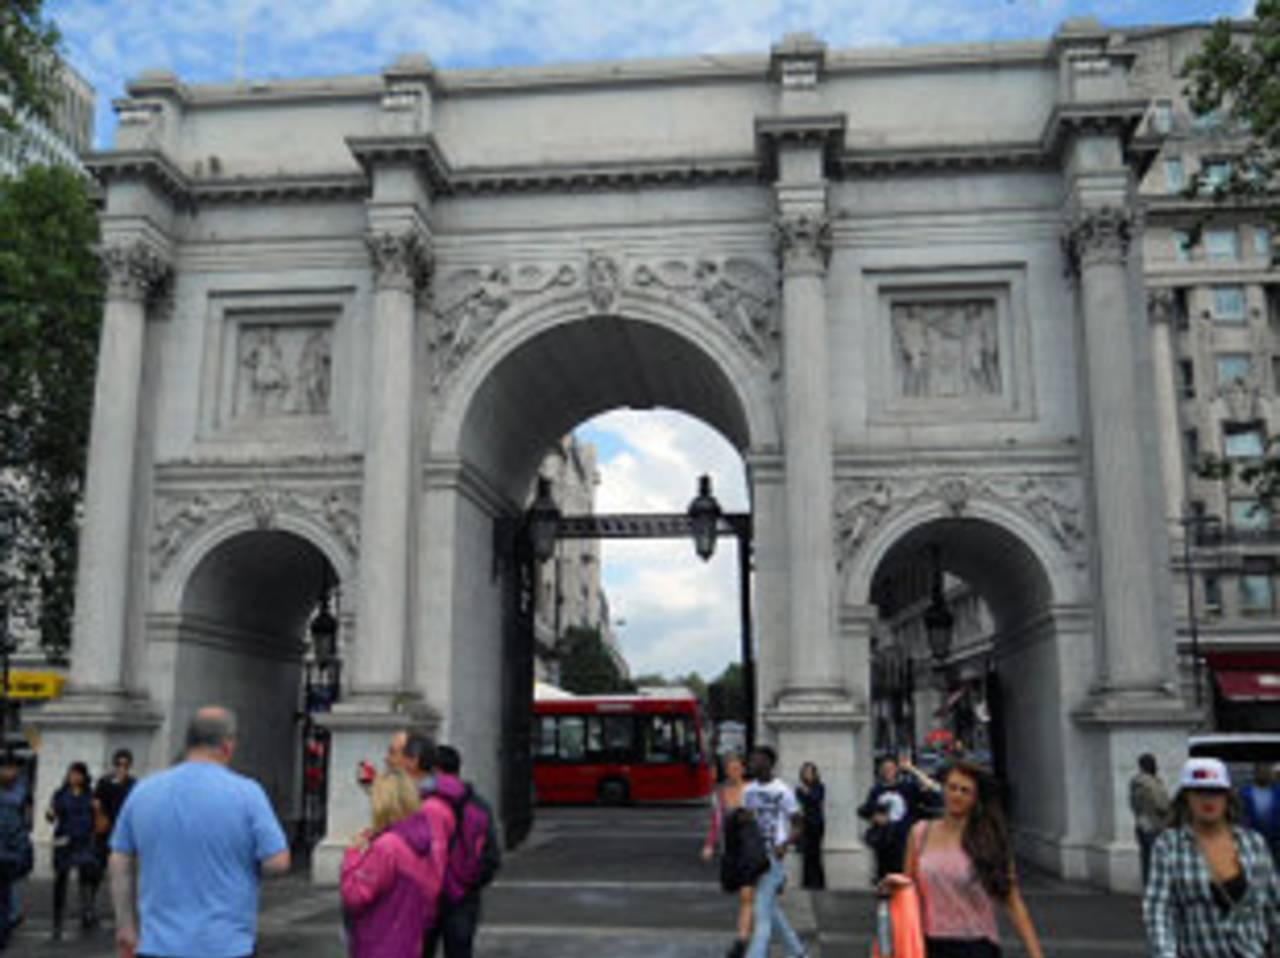 The Marble Arch in London, July 2012